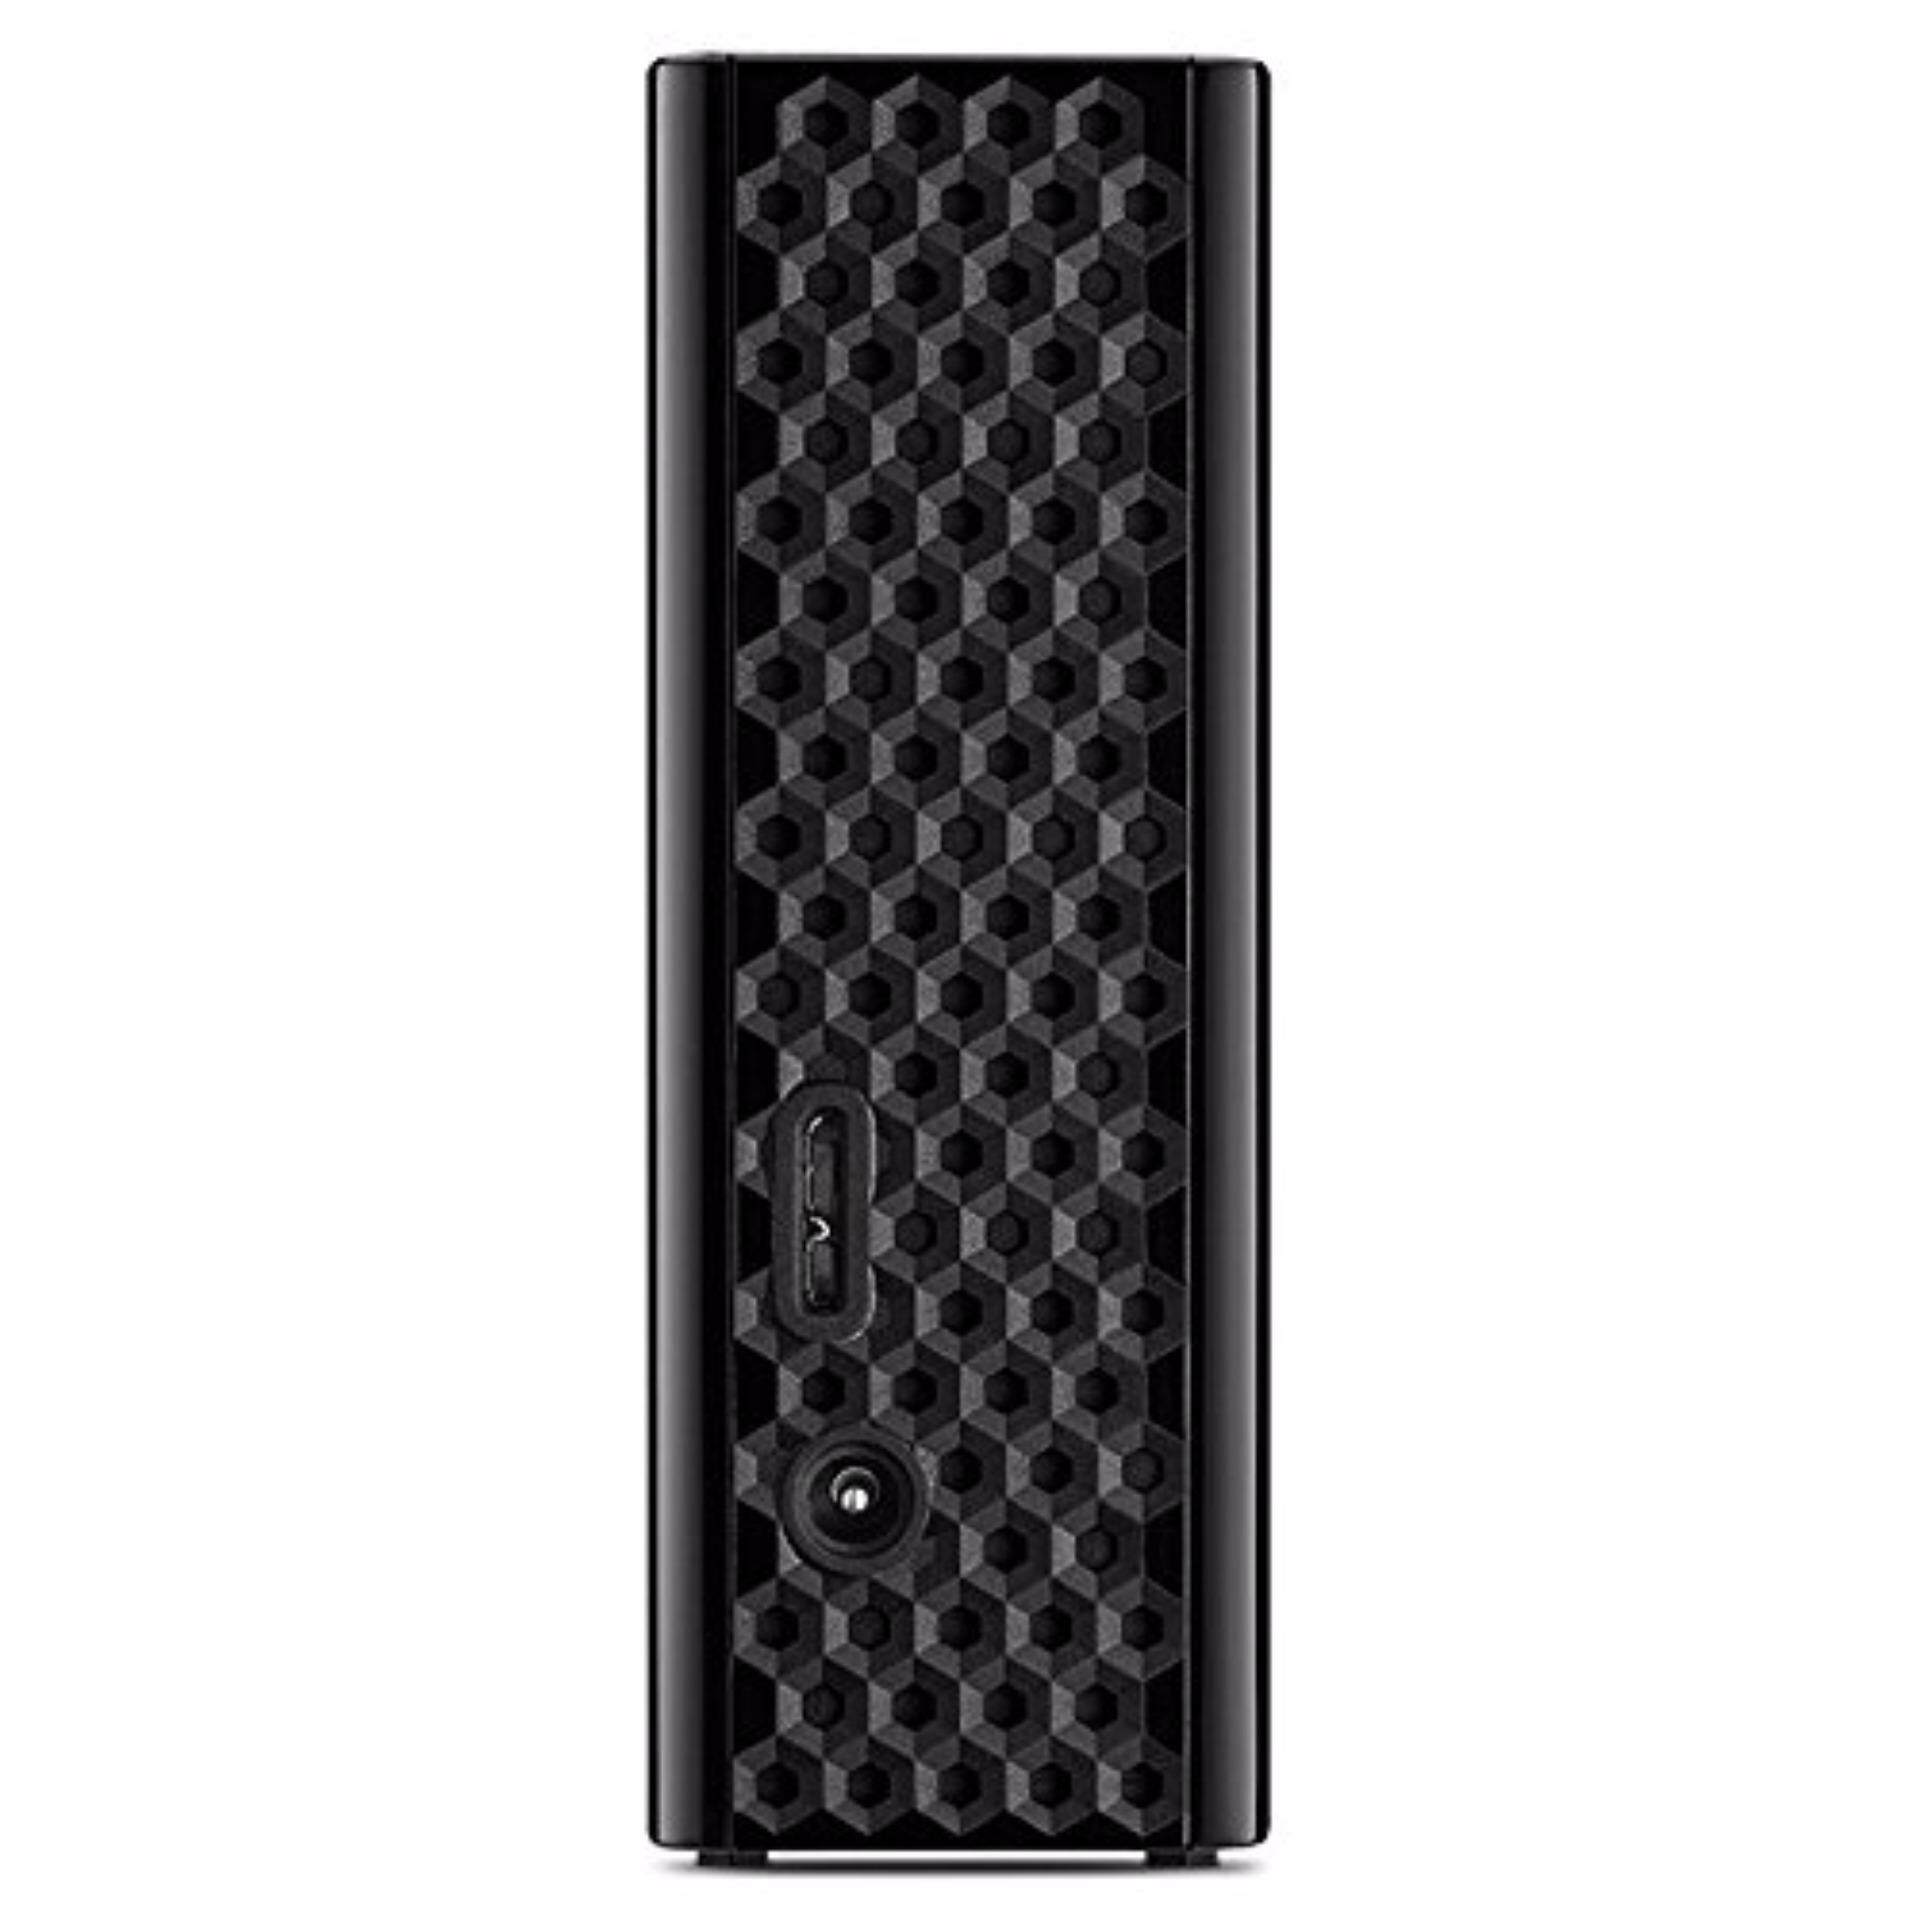 Seagate Backup Plus Desktop Hub 10TB (Up to 160 MB/s) with Integrated USB 3.0 Back up & Charge Hub Downloadable Seagate Backup Software Mac & Windows Compatible external hard disk